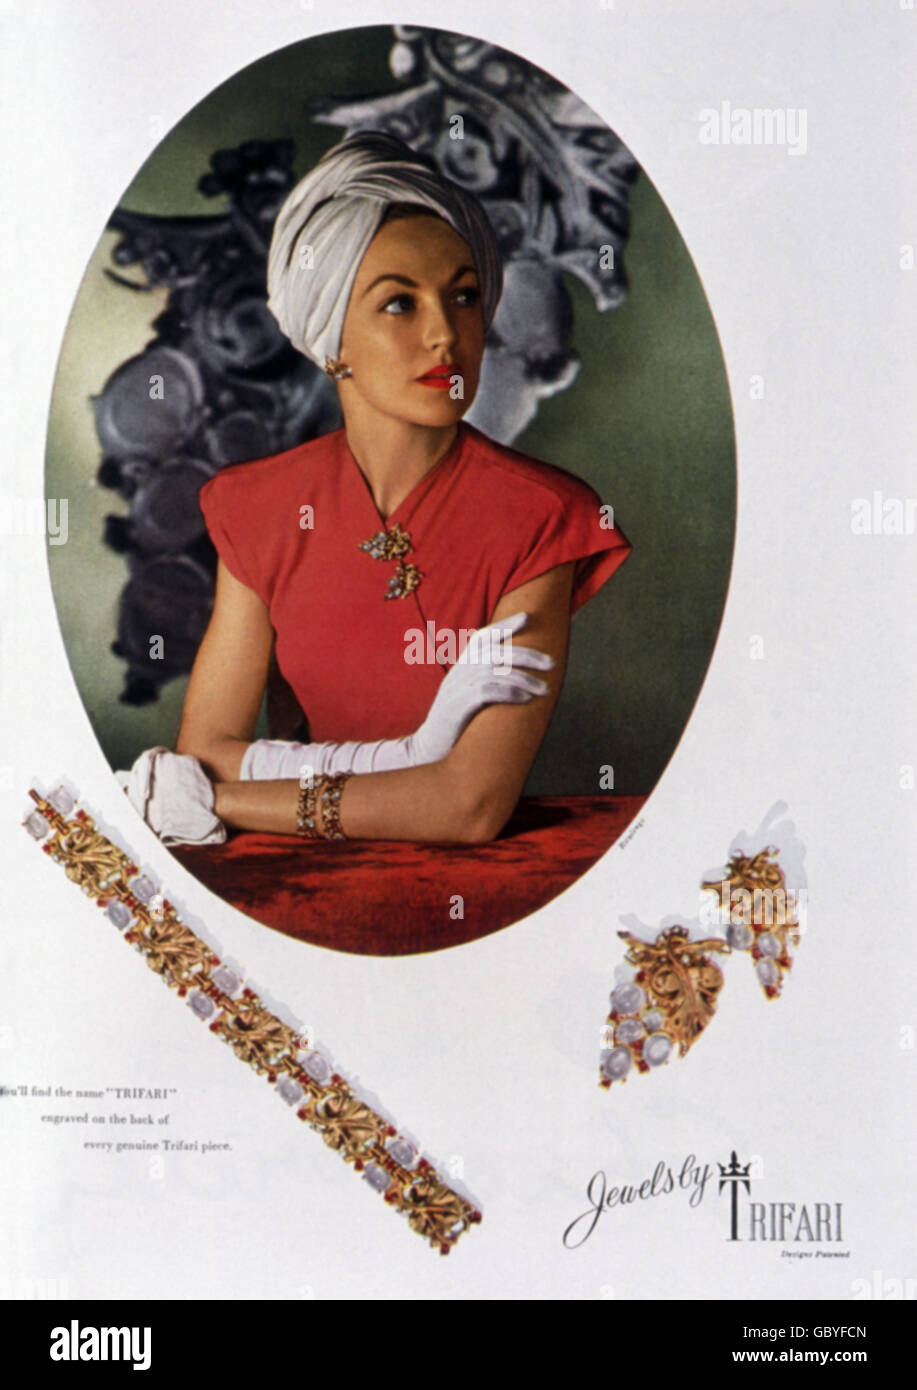 advertising, fashion, accessories, advertisement for jewellery and gems by Trifari, 1945, Additional-Rights-Clearences-Not Available Stock Photo